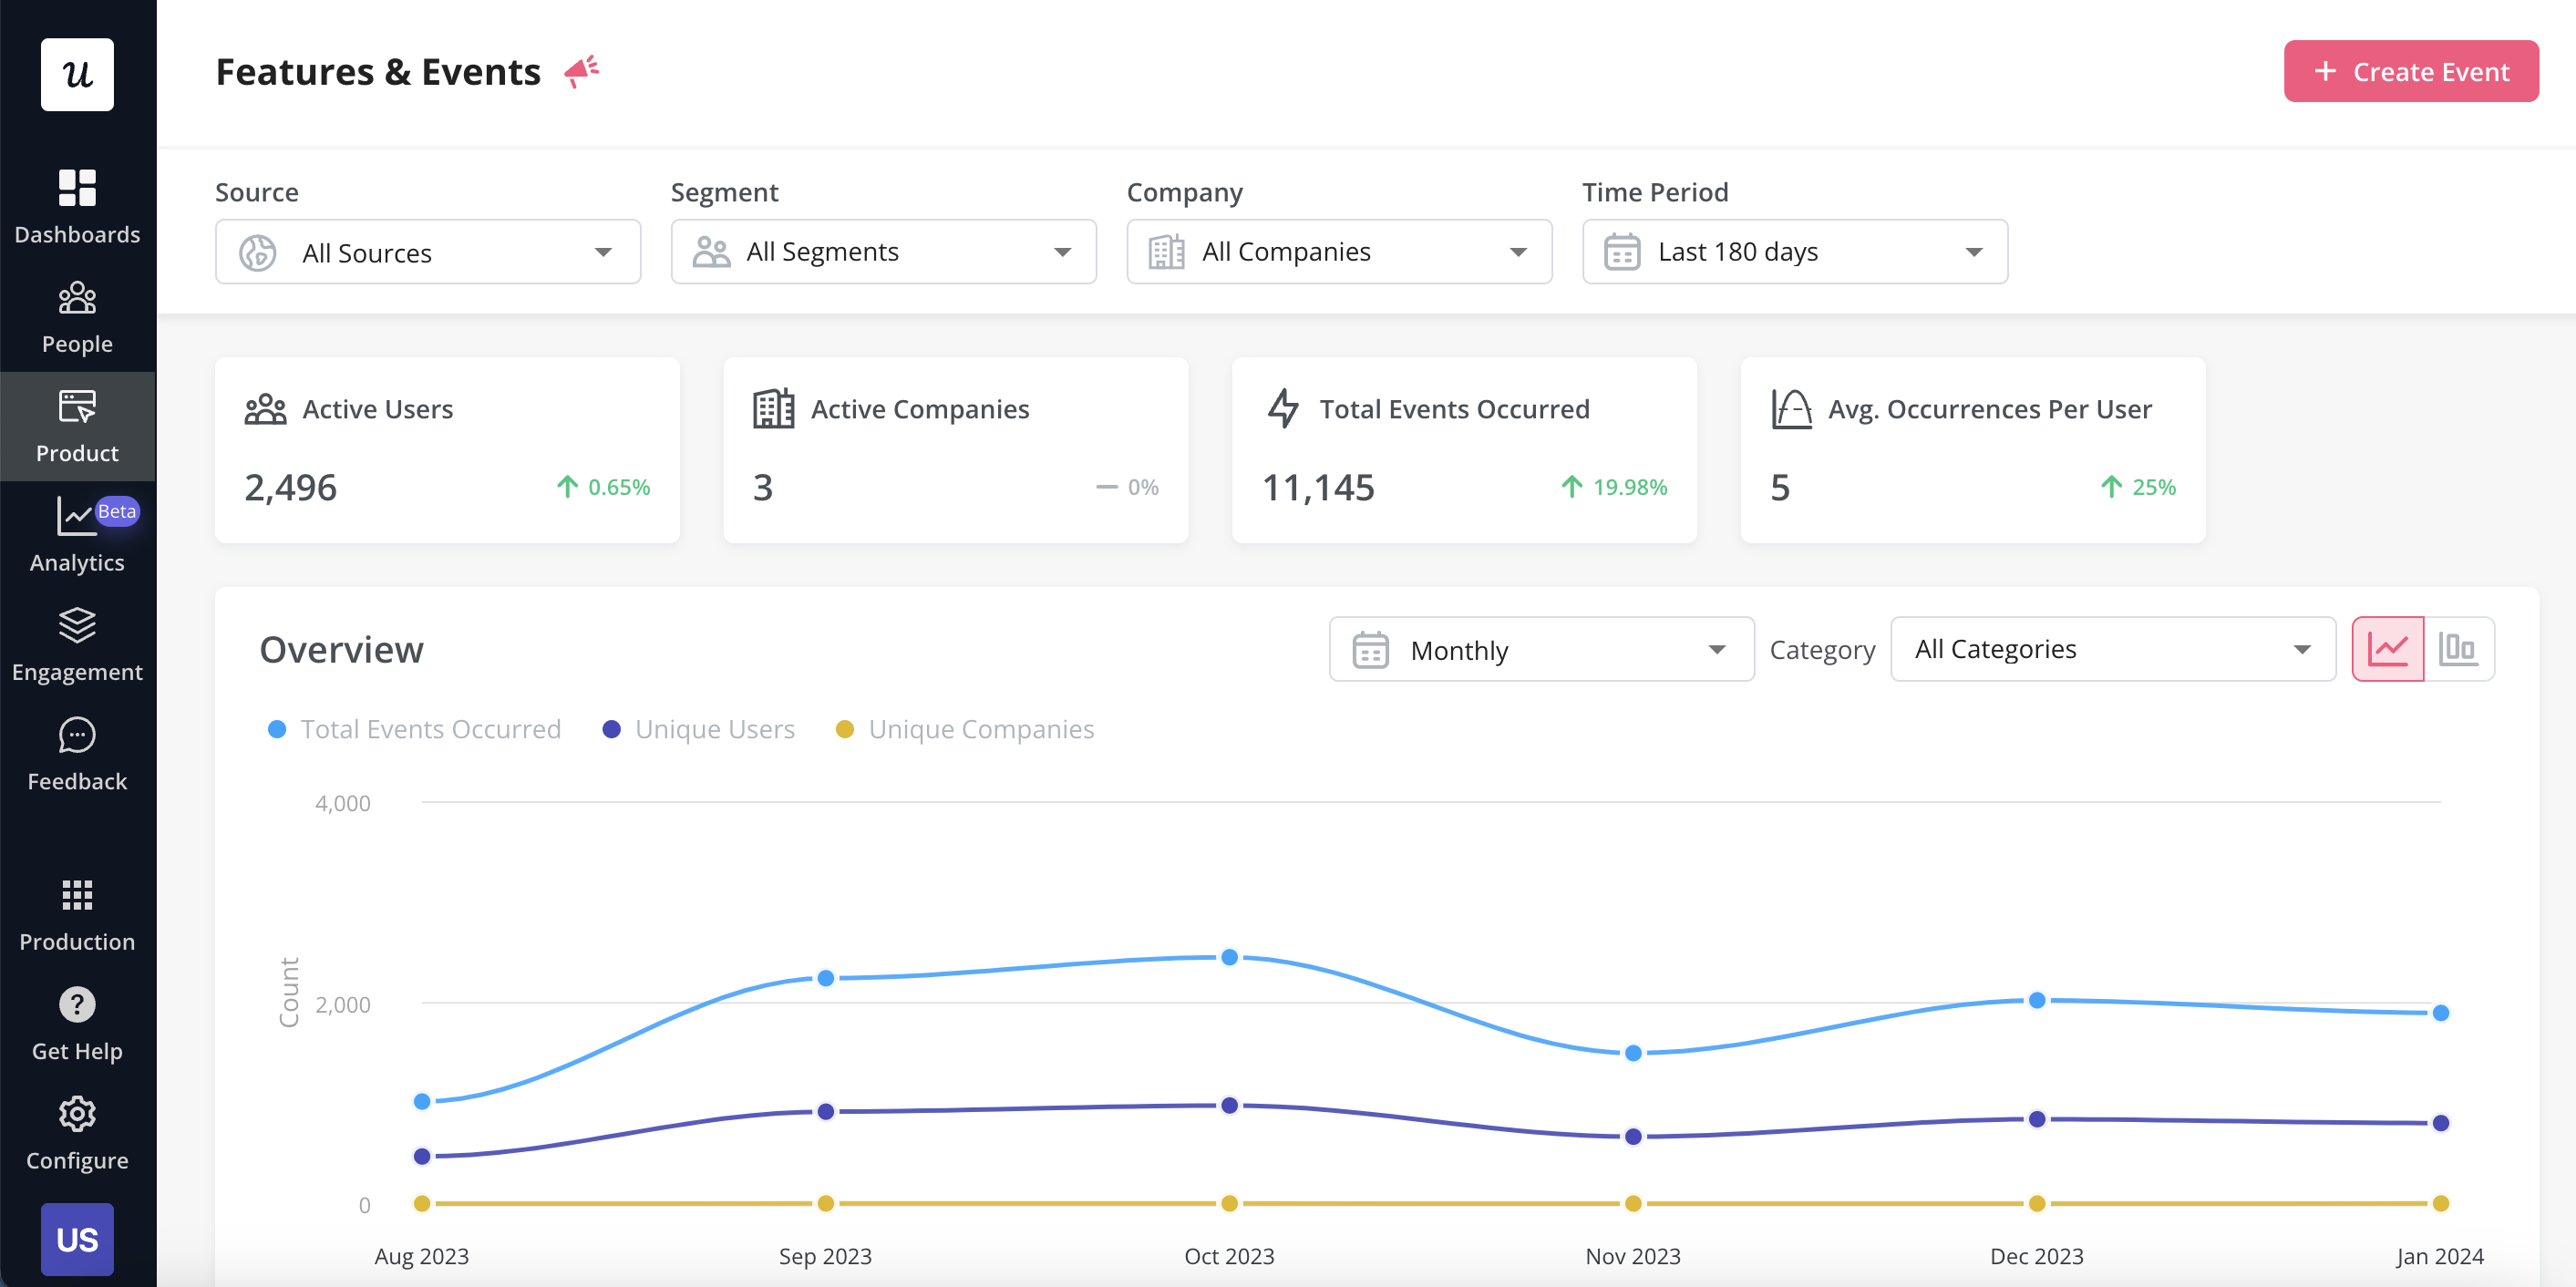 Feature and events in Userpilot - customer behavior analysis